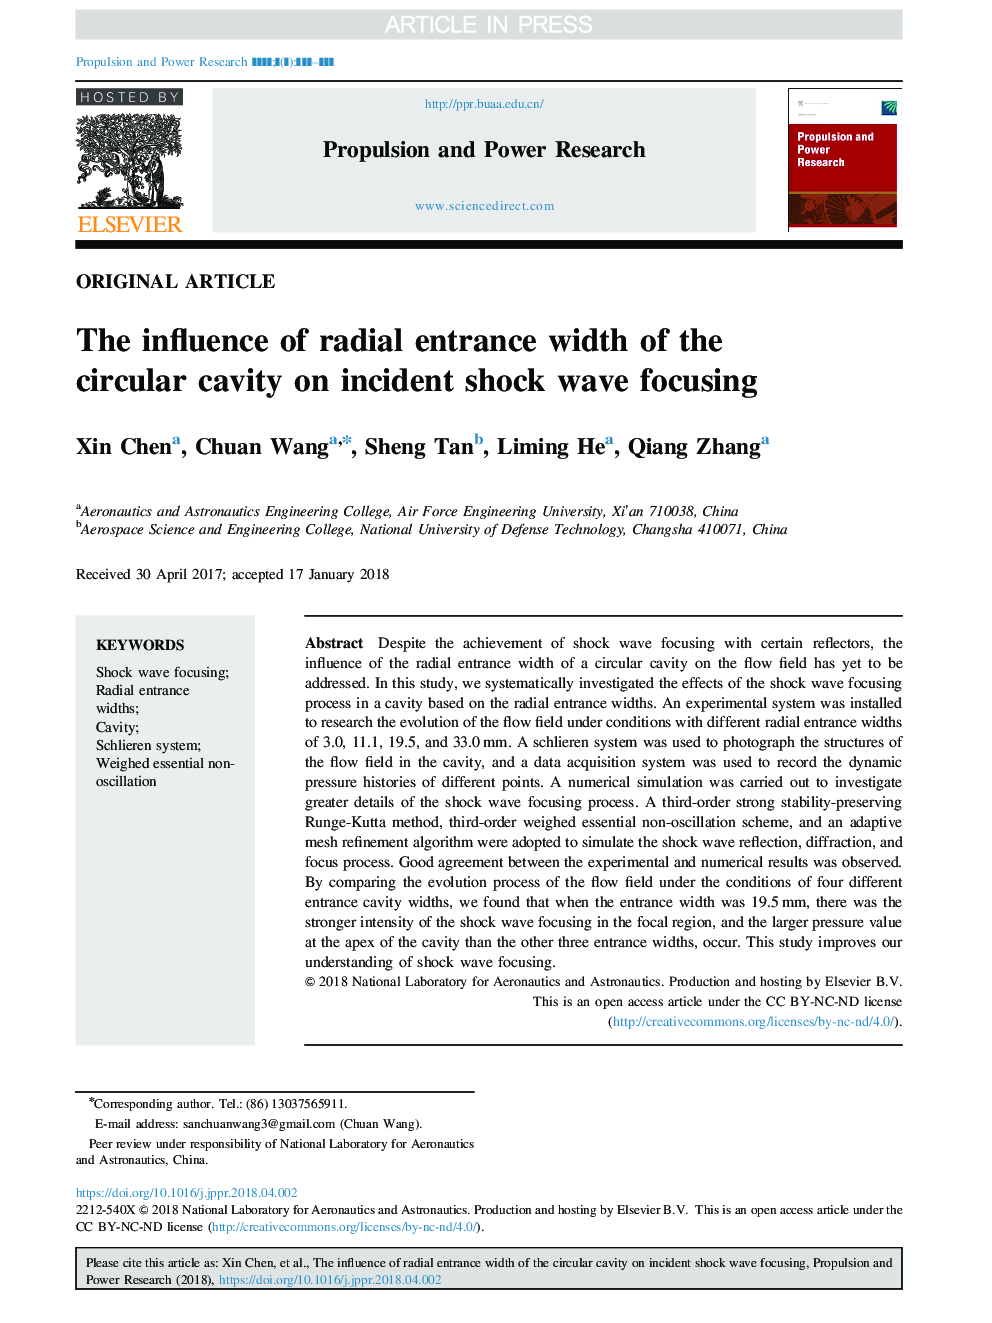 The influence of radial entrance width of the circular cavity on incident shock wave focusing